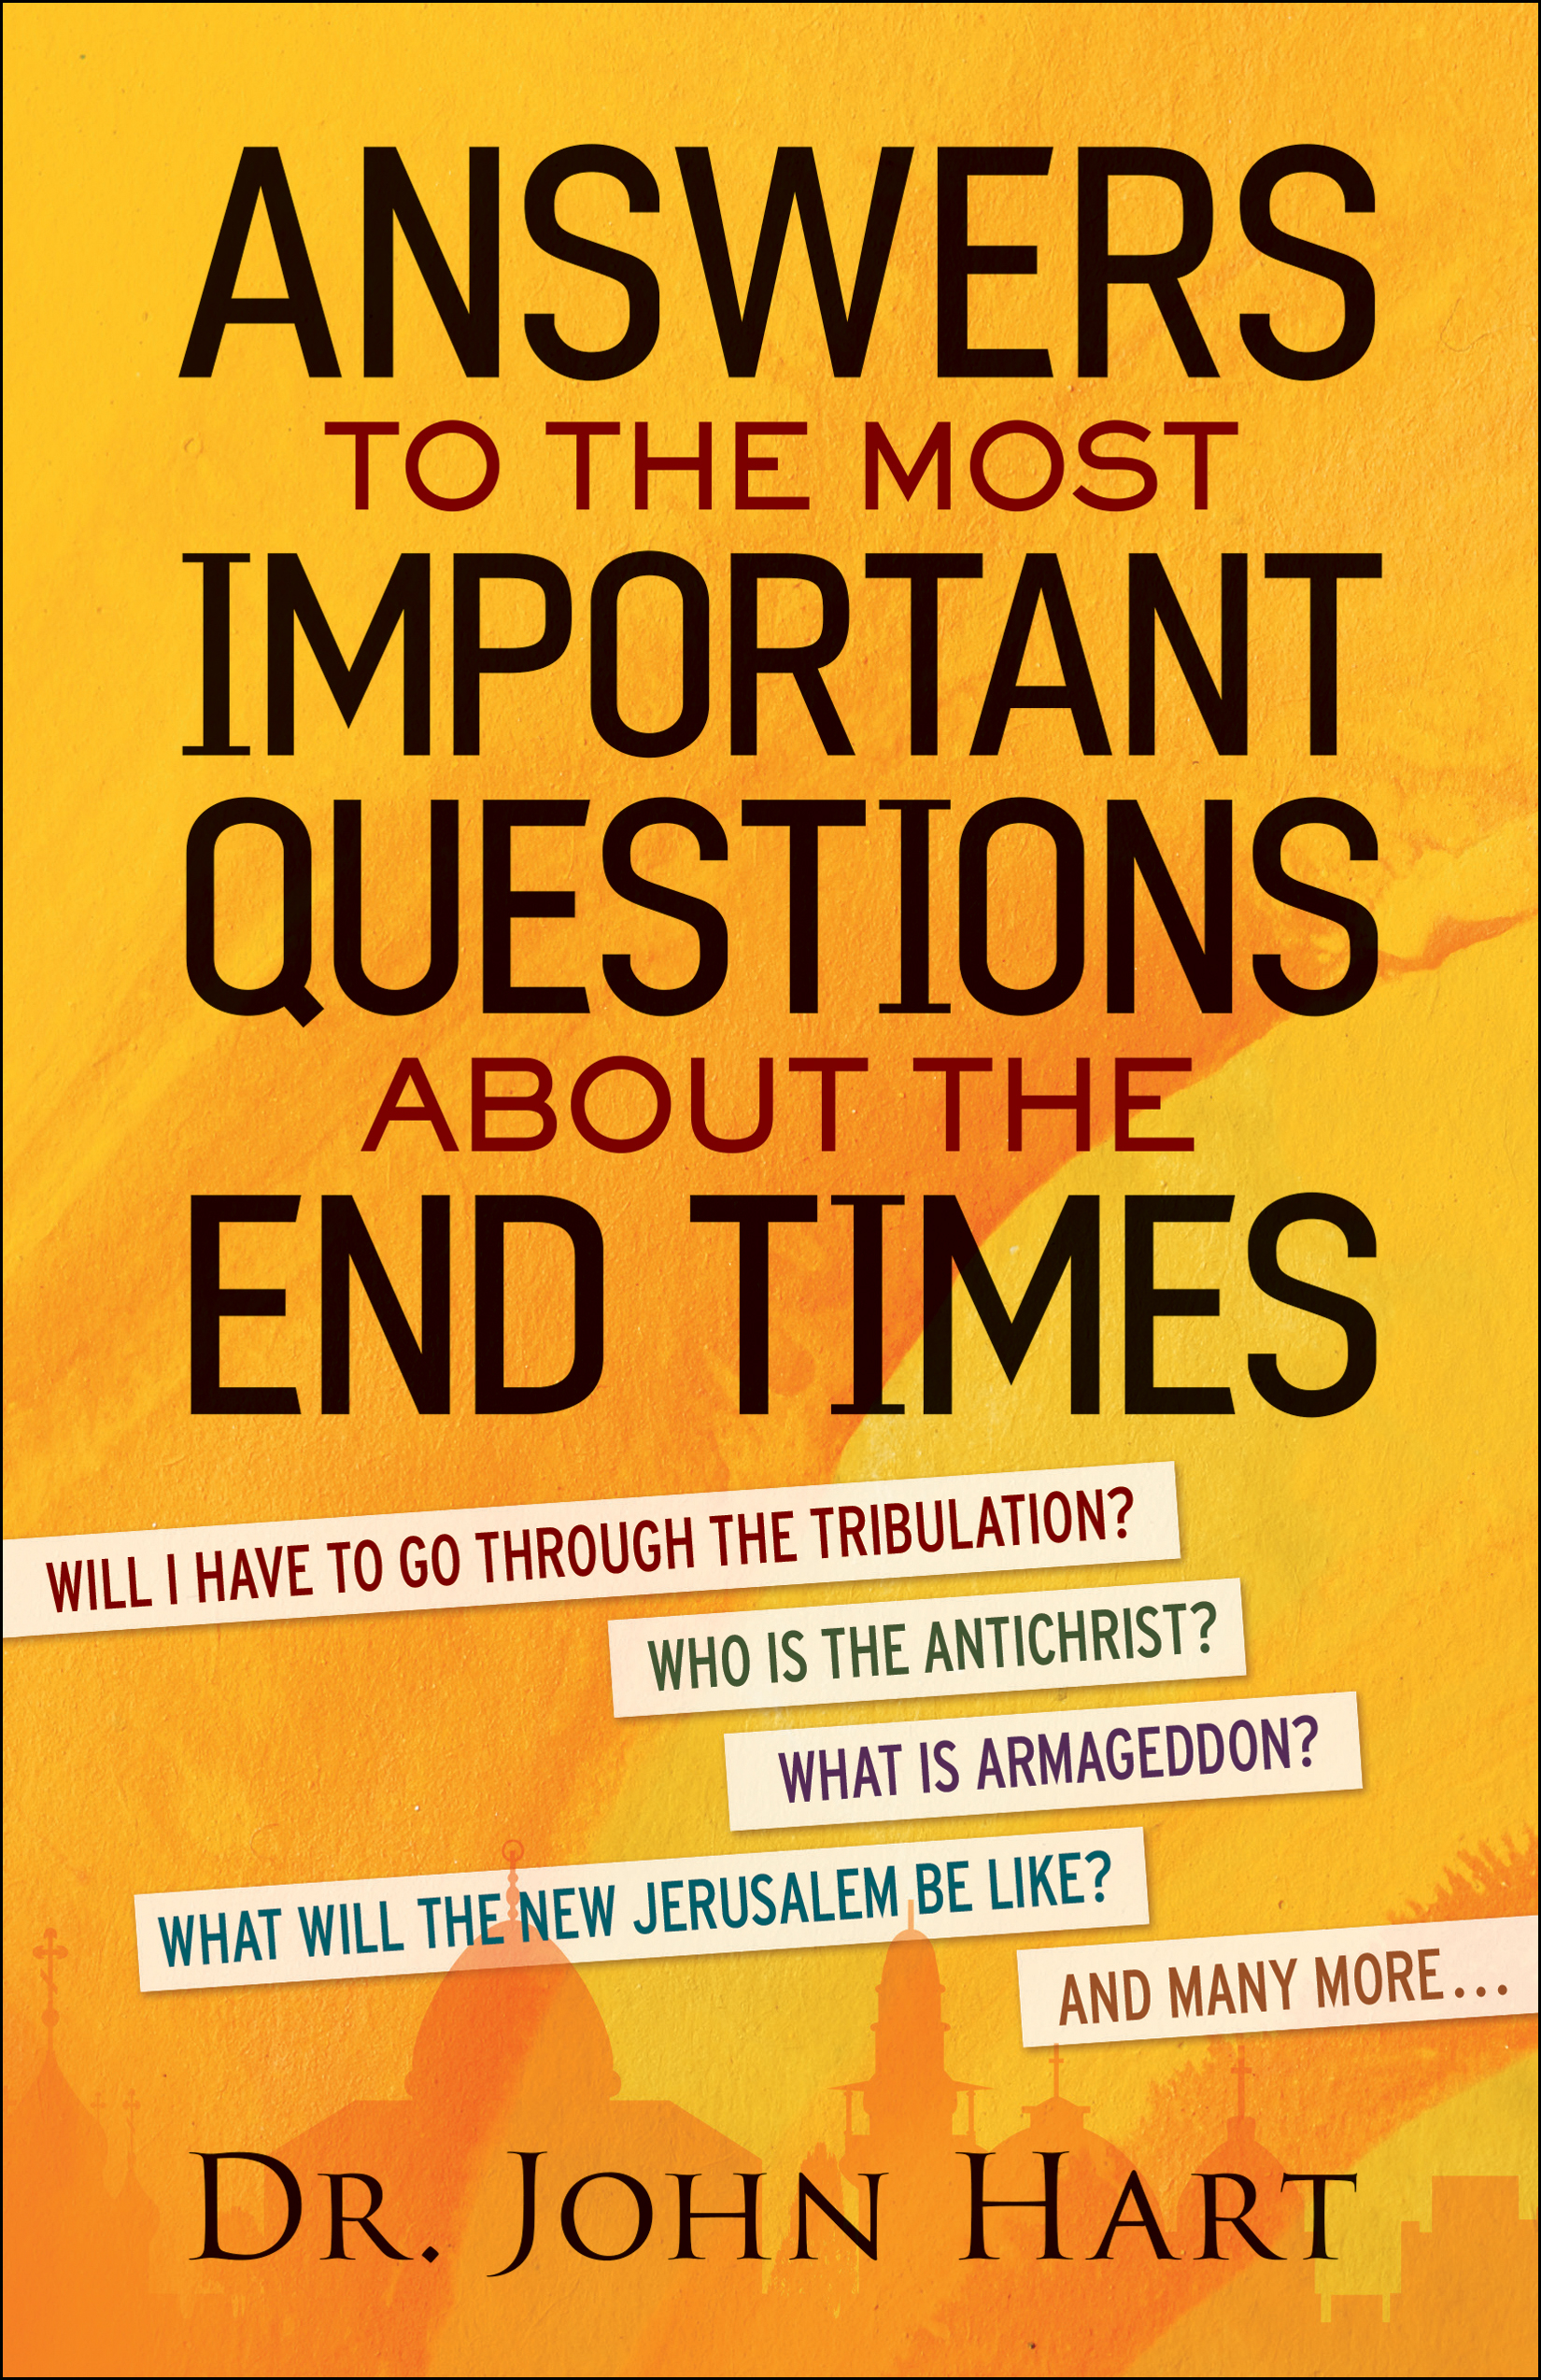 Answers to the Most Important Questions About the End Times